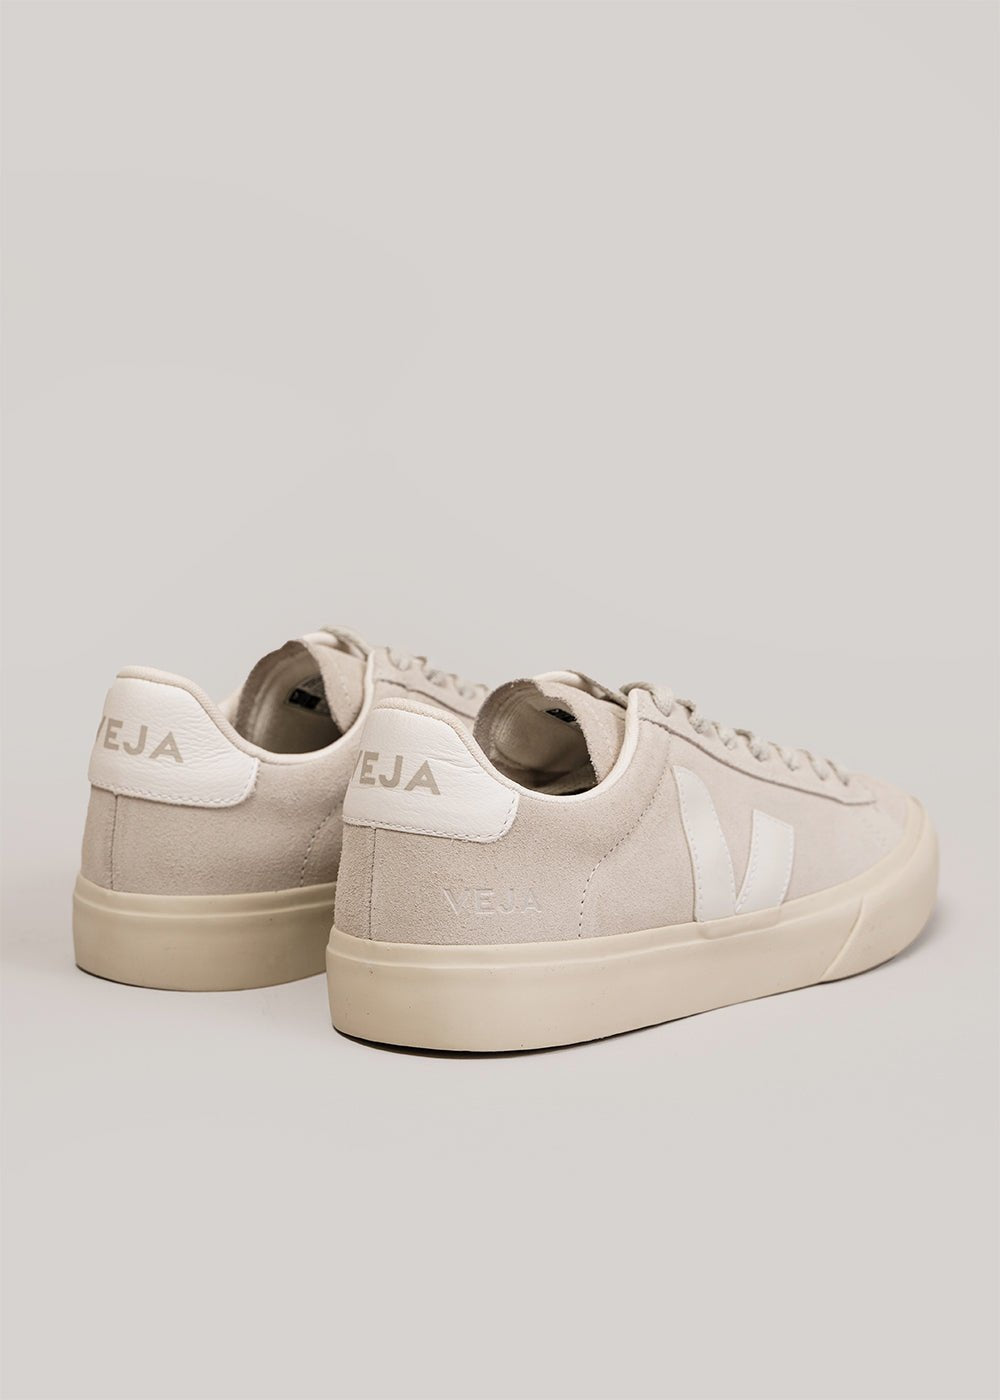 Veja Natural White Campo Sneakers - New Classics Studios Sustainable Ethical Fashion Canada